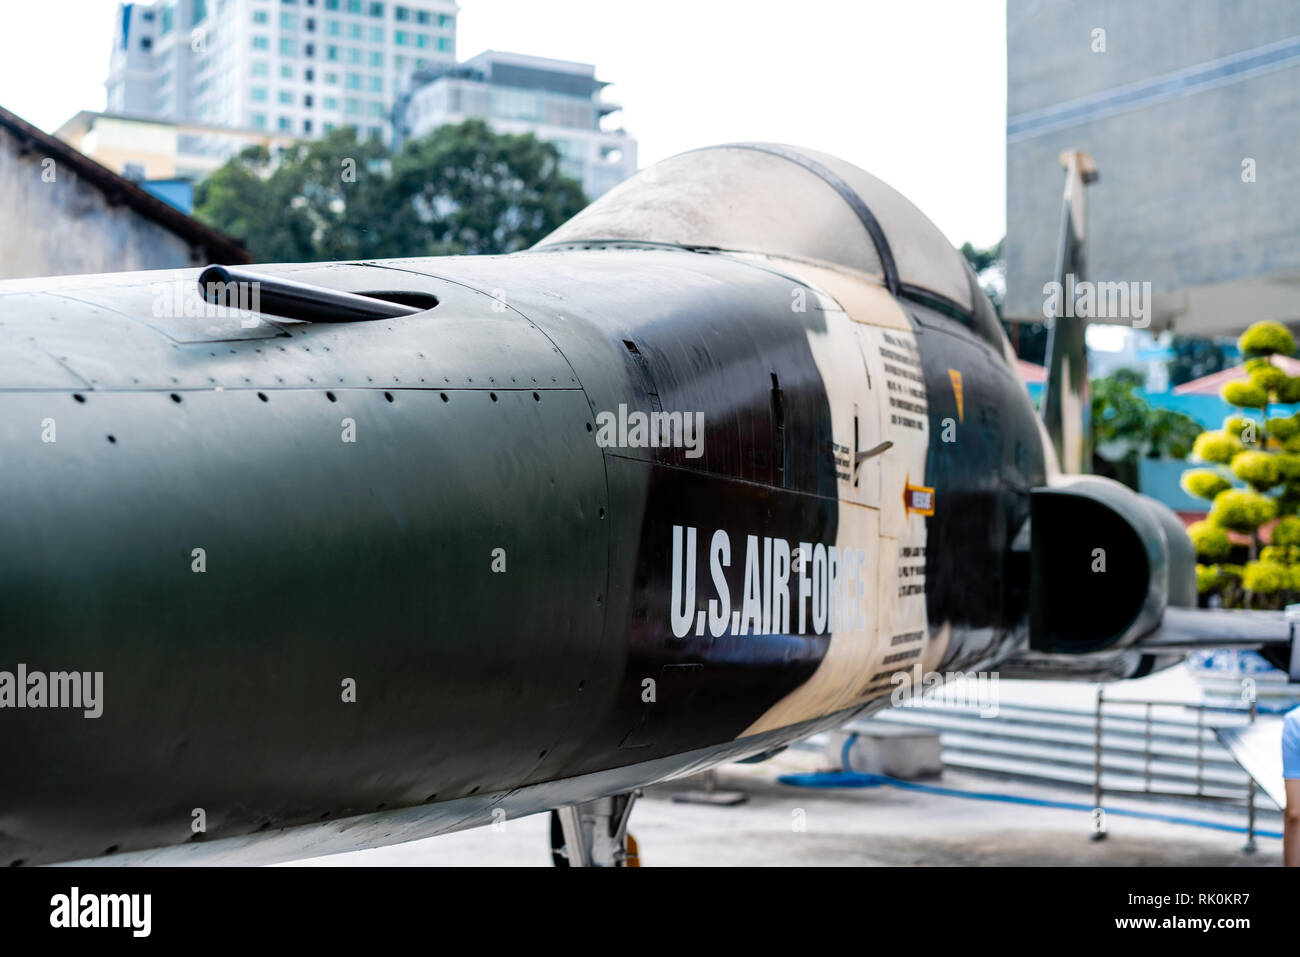 HO CHI MINH CITY, VIETNAM - JANUARY 25, 2019: War Remnants Museum. US AIR FORCE near Saigon Remnants Museum captured during the war, the most popular  Stock Photo